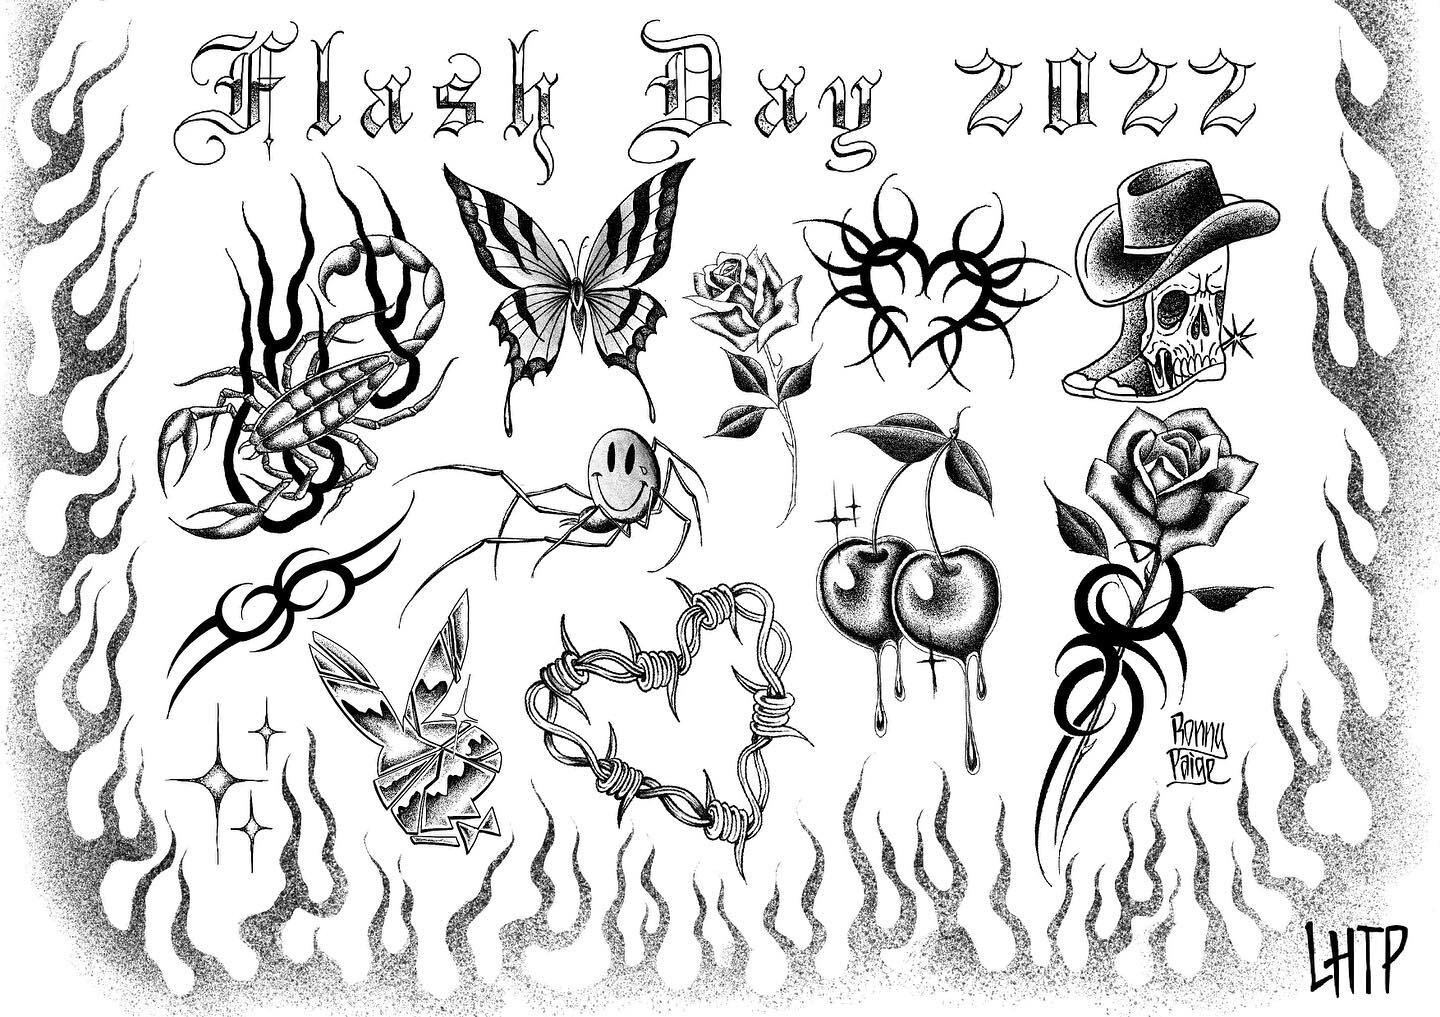 @ronnypaigetattoo flash for Saturday! Cash is preferred for the event Saturday, it&rsquo;ll keep things moving quicker and hopefully we can get everyone tattooed who wants to get one! See you there!